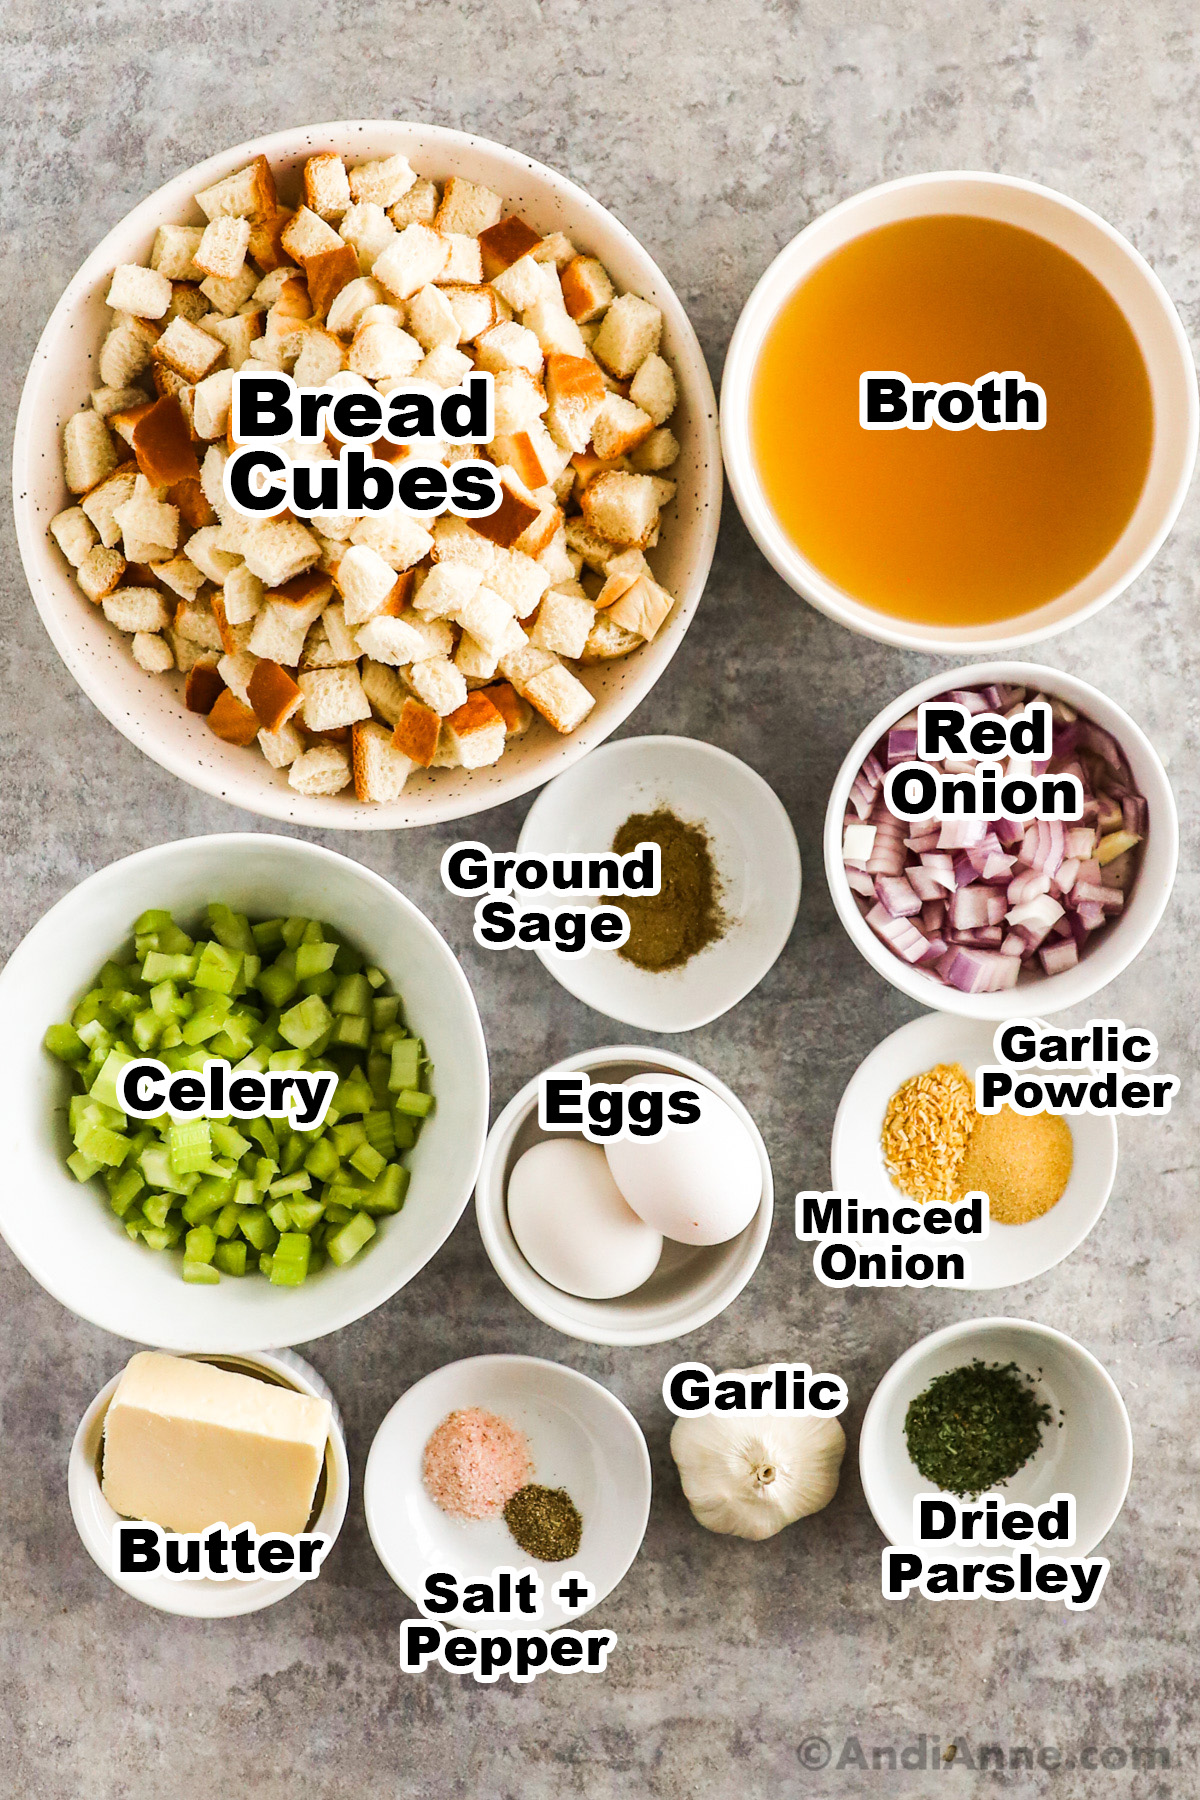 Recipe ingredients on counter including bowl of bread crumbs, bowls of broth, chopped celery, red onion, spices, eggs, garlic and butter.